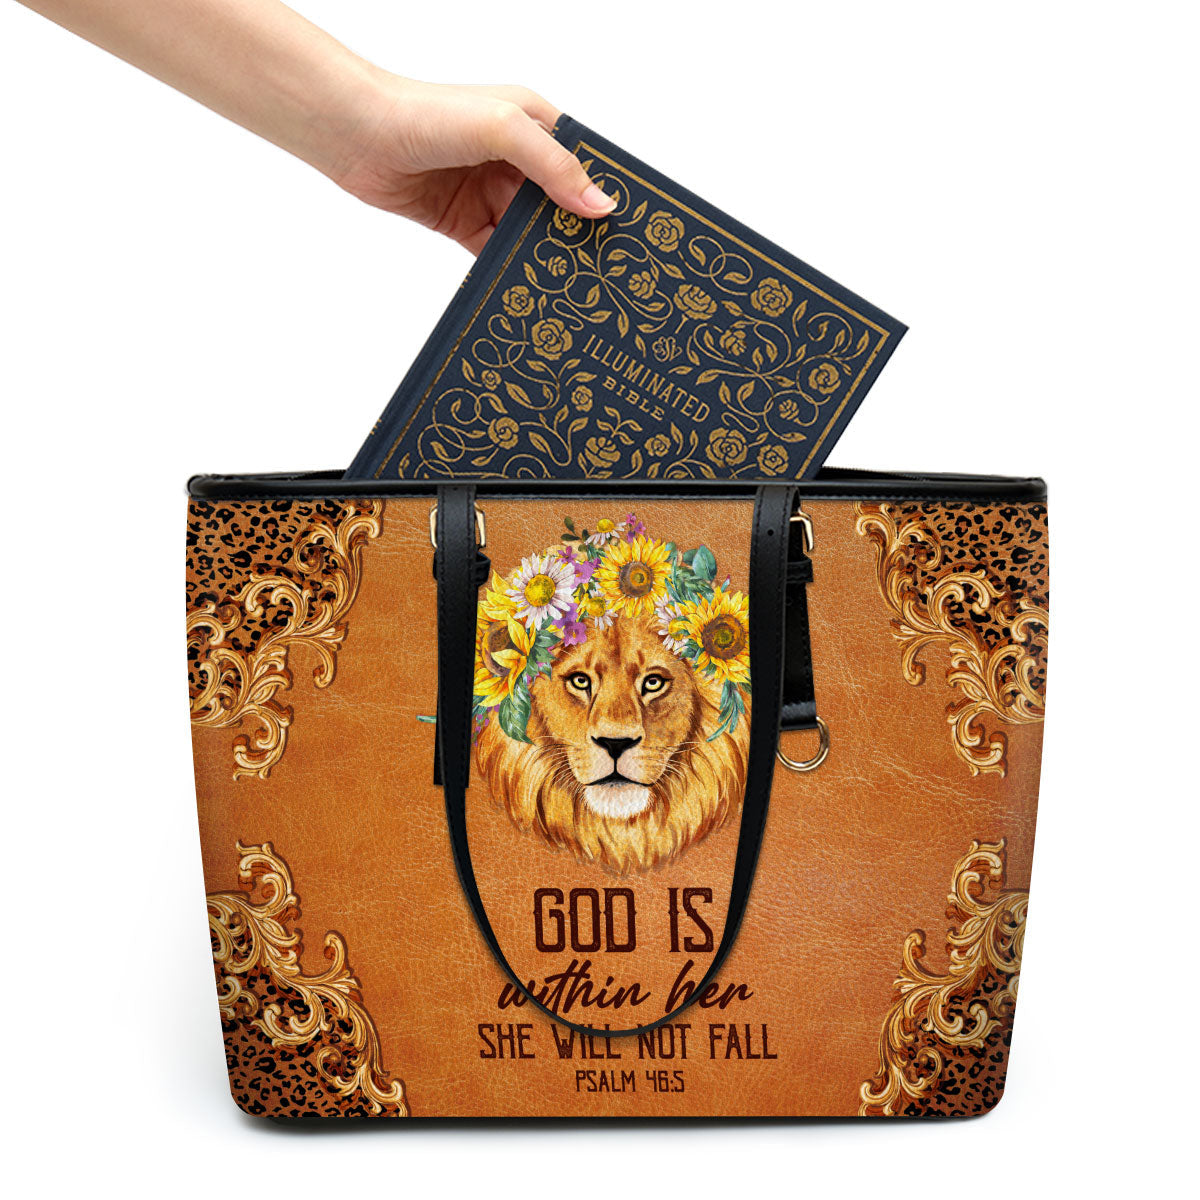 God Is Within Her She Will Not Fall Large Leather Tote Bag - Christ Gifts For Religious Women - Best Mother's Day Gifts